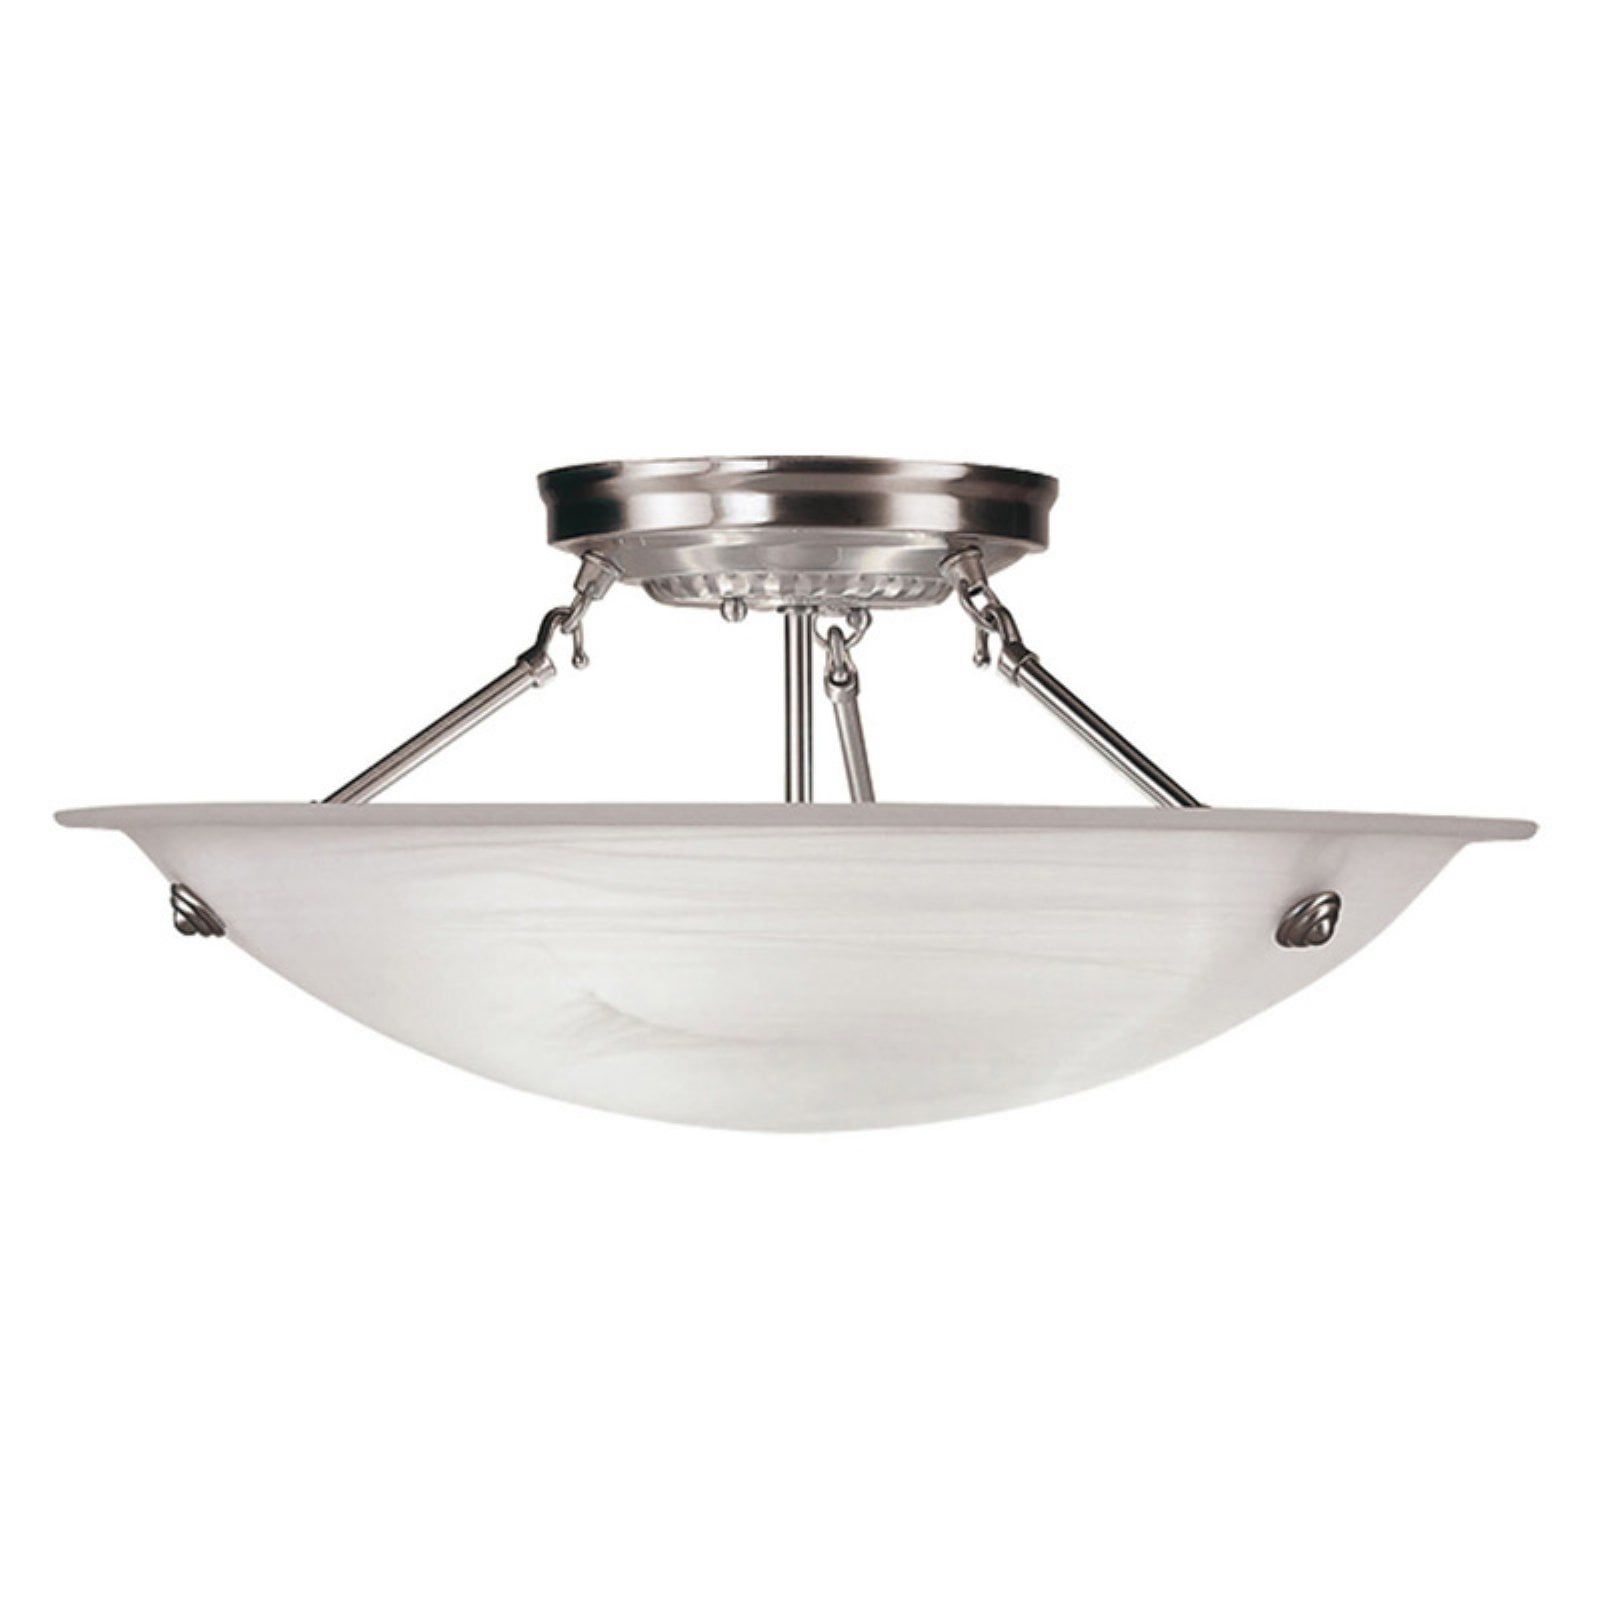 Oasis Brushed Nickel 3-Light LED Bowl Ceiling Mount with White Alabaster Glass